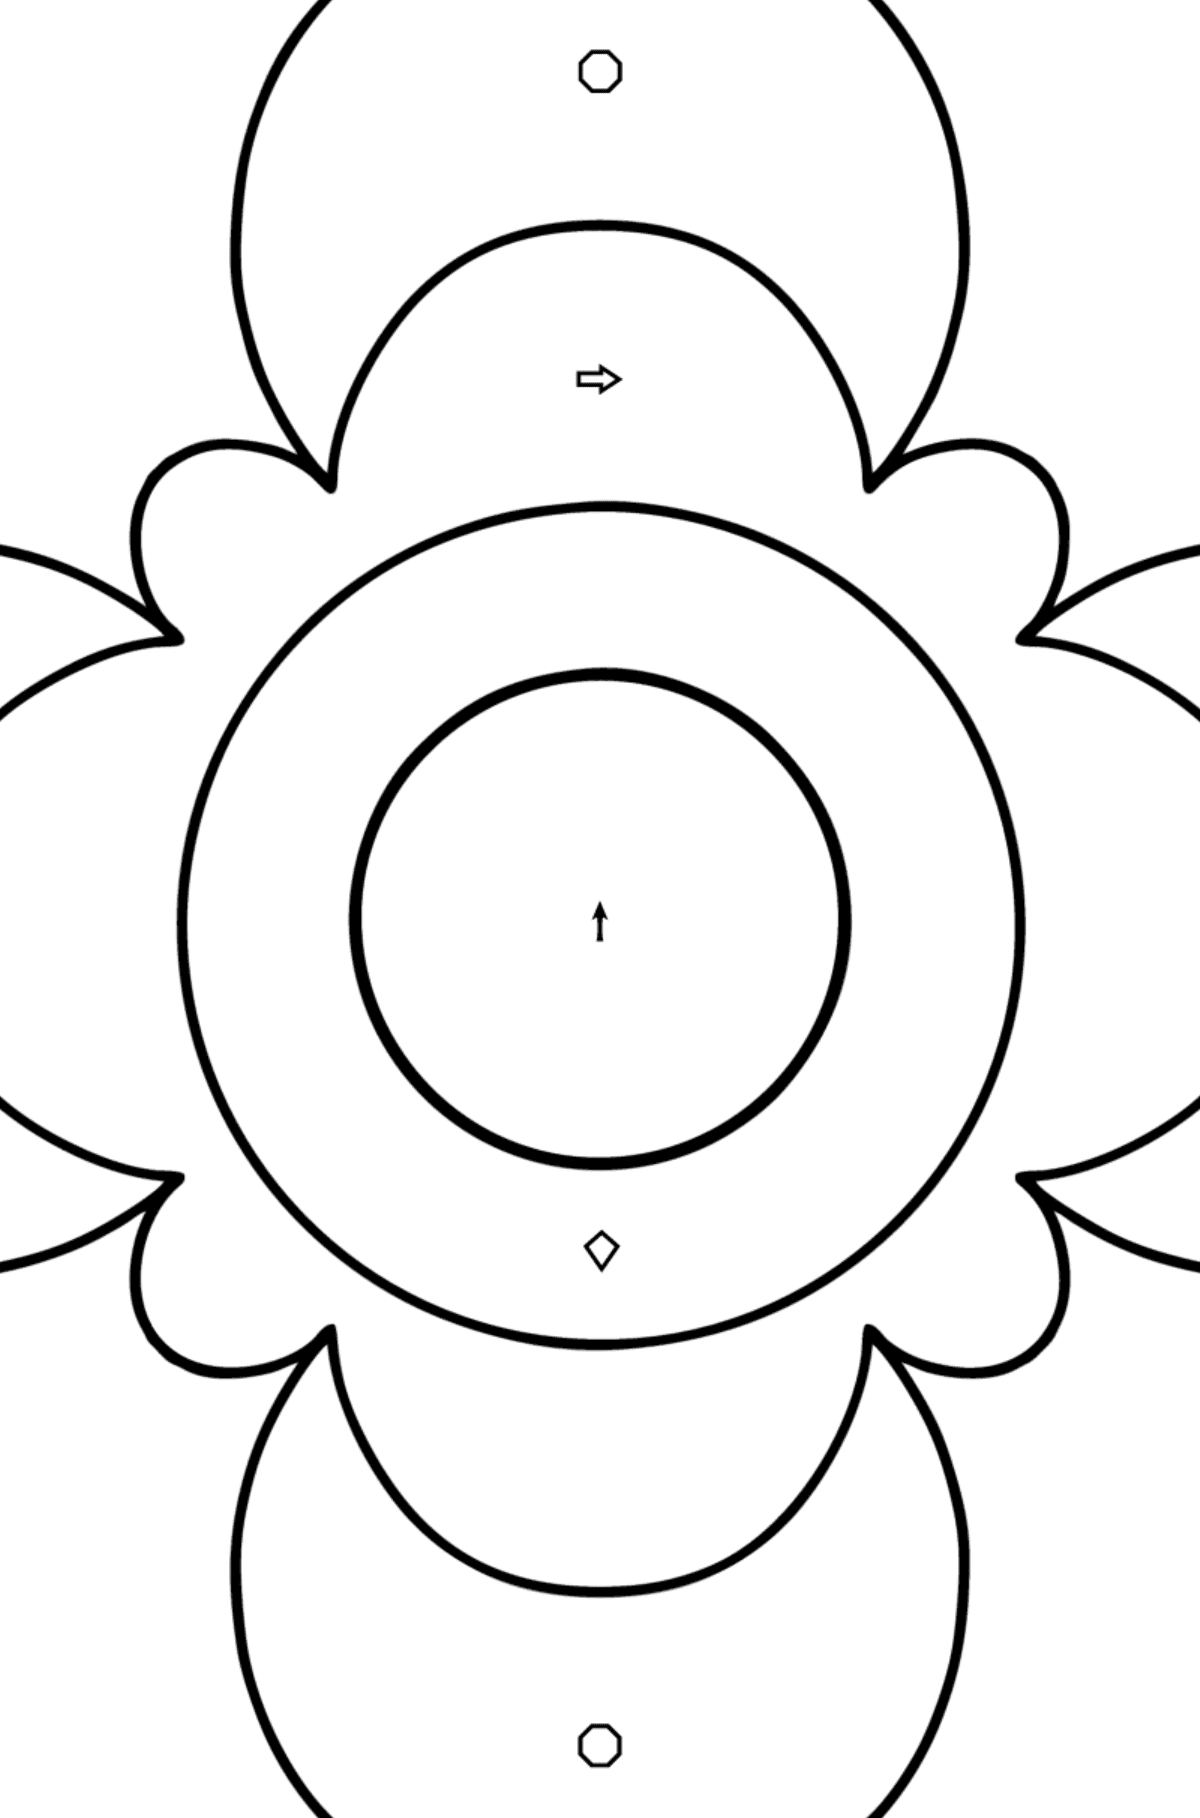 Coloring Anti stress flower for kids - Coloring by Symbols and Geometric Shapes for Kids